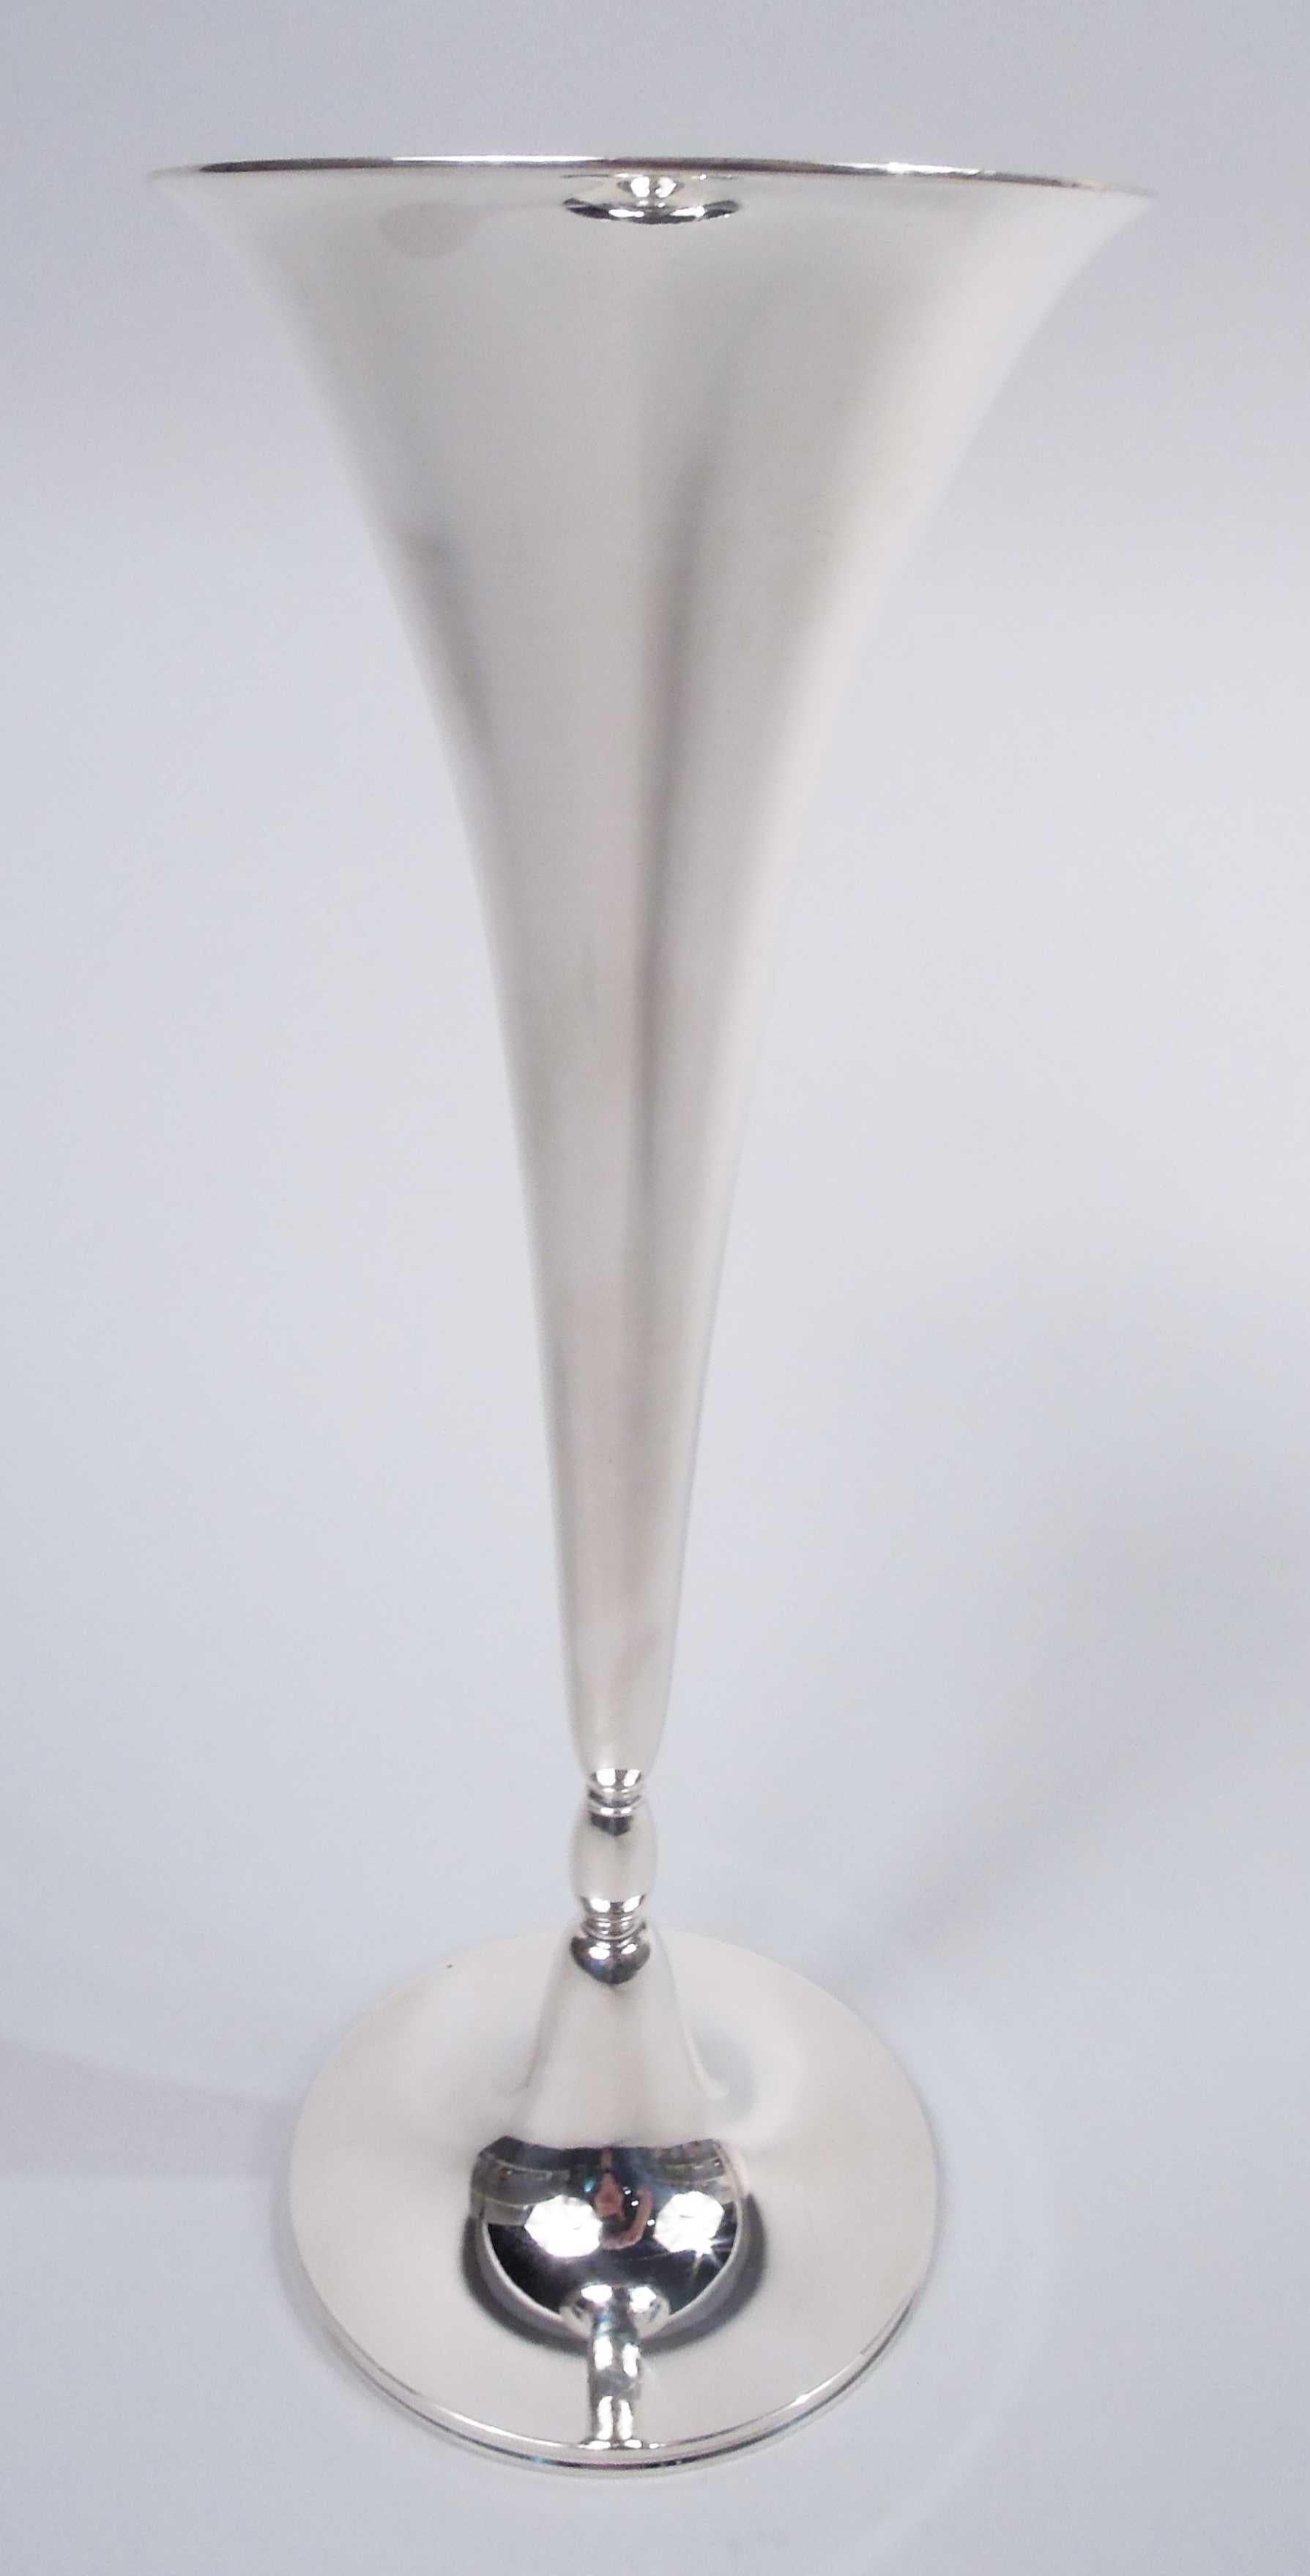 Modern sterling silver vase. Made by Tiffany & Co. in New York, ca 1908. Cone with flared mouth on vertical ovoid knop mounted to domed foot. Fully marked including maker’s stamp, pattern no. 17188 (first produced in 1908), and director’s letter m.